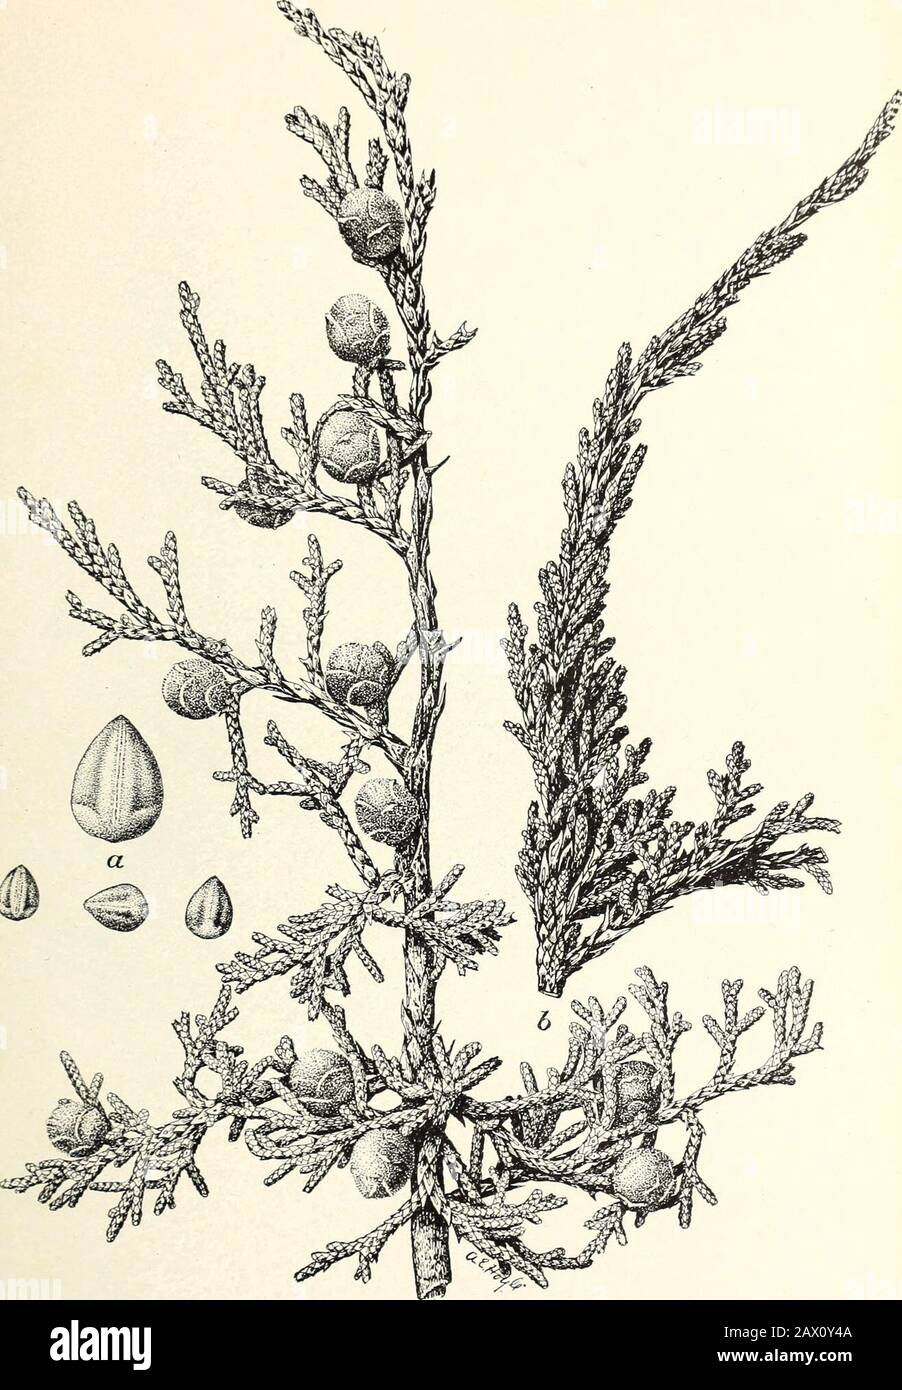 The cypress and juniper trees of the Rocky Mountain region . gelm.) Sargent. COMMON NAME AND EARLY HISTORY. This species is commonly called merely cedar or juniper, laypeople as a rule not distinguishing it from Utah juniper, with whichit often grows. The name one-seed juniper, derived from the tech-nical name of the tree, is appropriate because the small berries usuallycontain but one seed. This one-seed character, however, can not bedepended upon to distinguish Juniperus monosperma from Utahjuniper and Juniperus megalocarpa, since both of these have one-seeded fruit. There is no record of wh Stock Photo